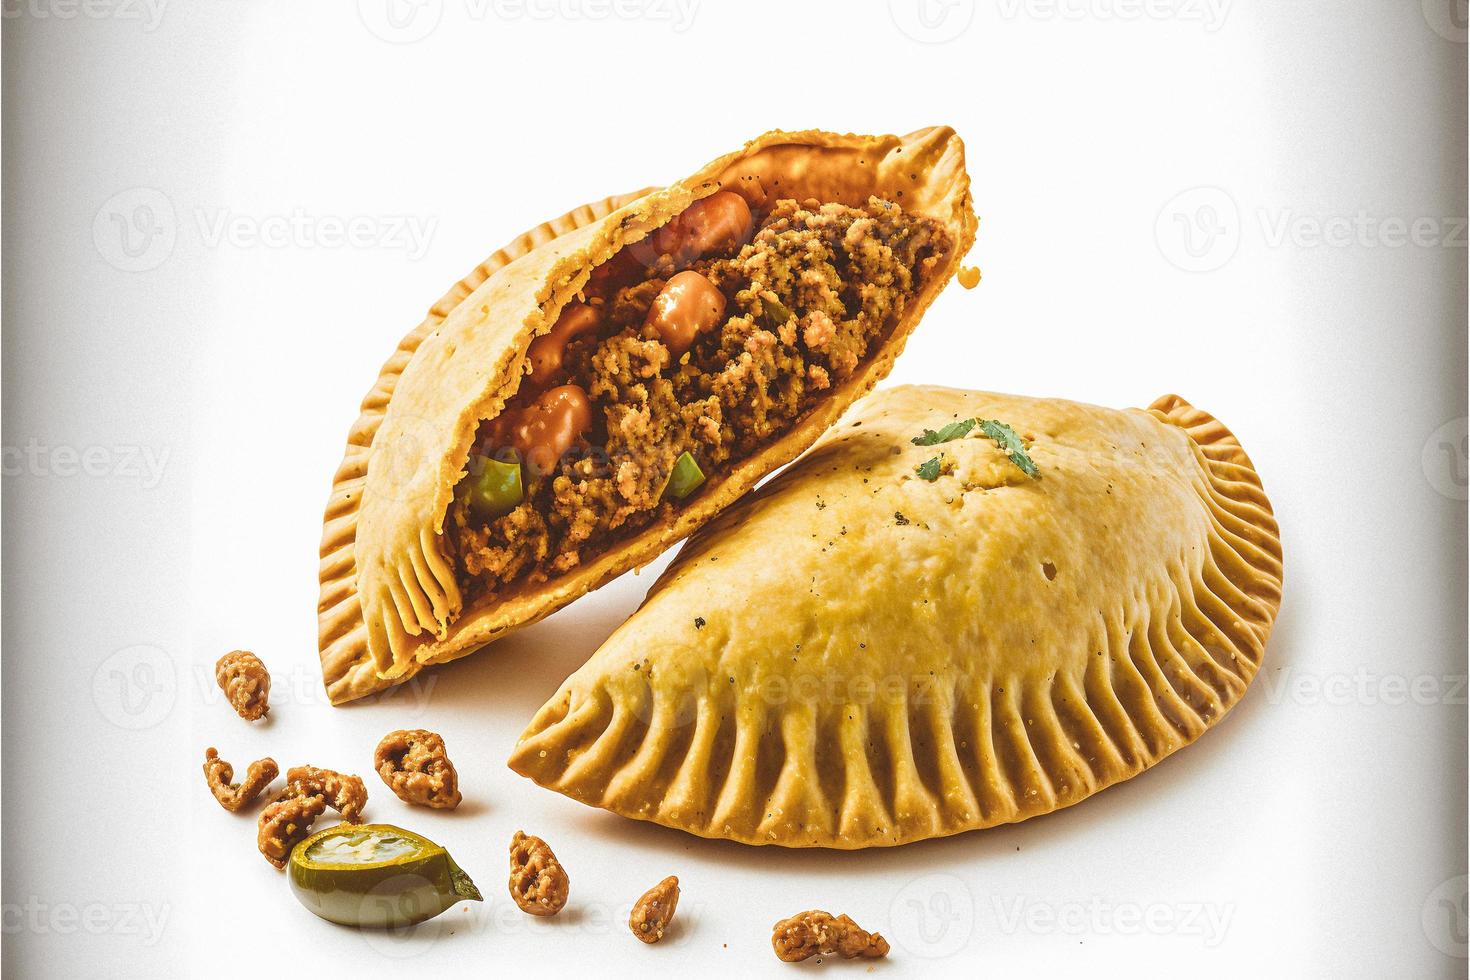 Bring a touch of sophistication to your food-related projects with our Empanadas on a white background. Showcase the rich flavors and diversity of Latin American cuisine photo